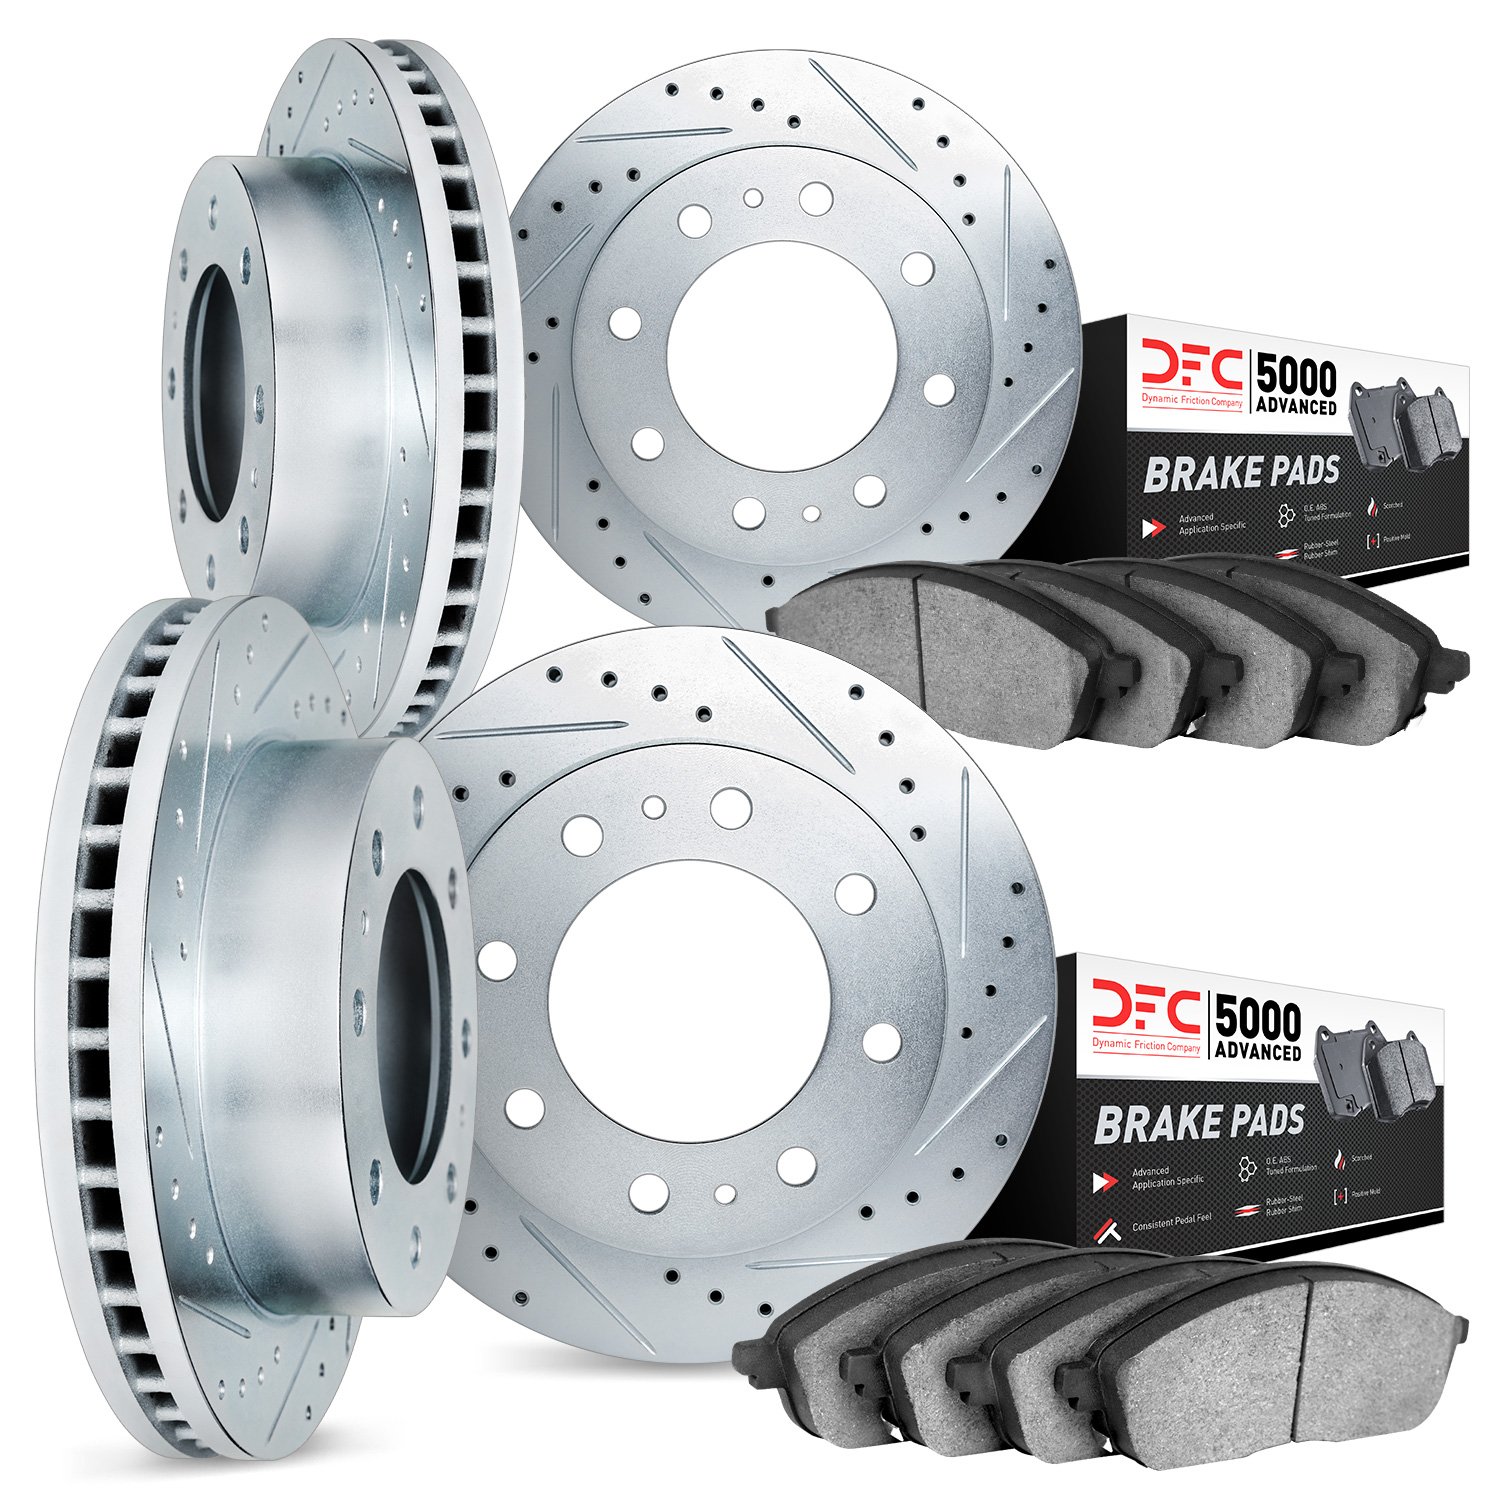 7504-54334 Drilled/Slotted Brake Rotors w/5000 Advanced Brake Pads Kit [Silver], 1999-2004 Ford/Lincoln/Mercury/Mazda, Position: